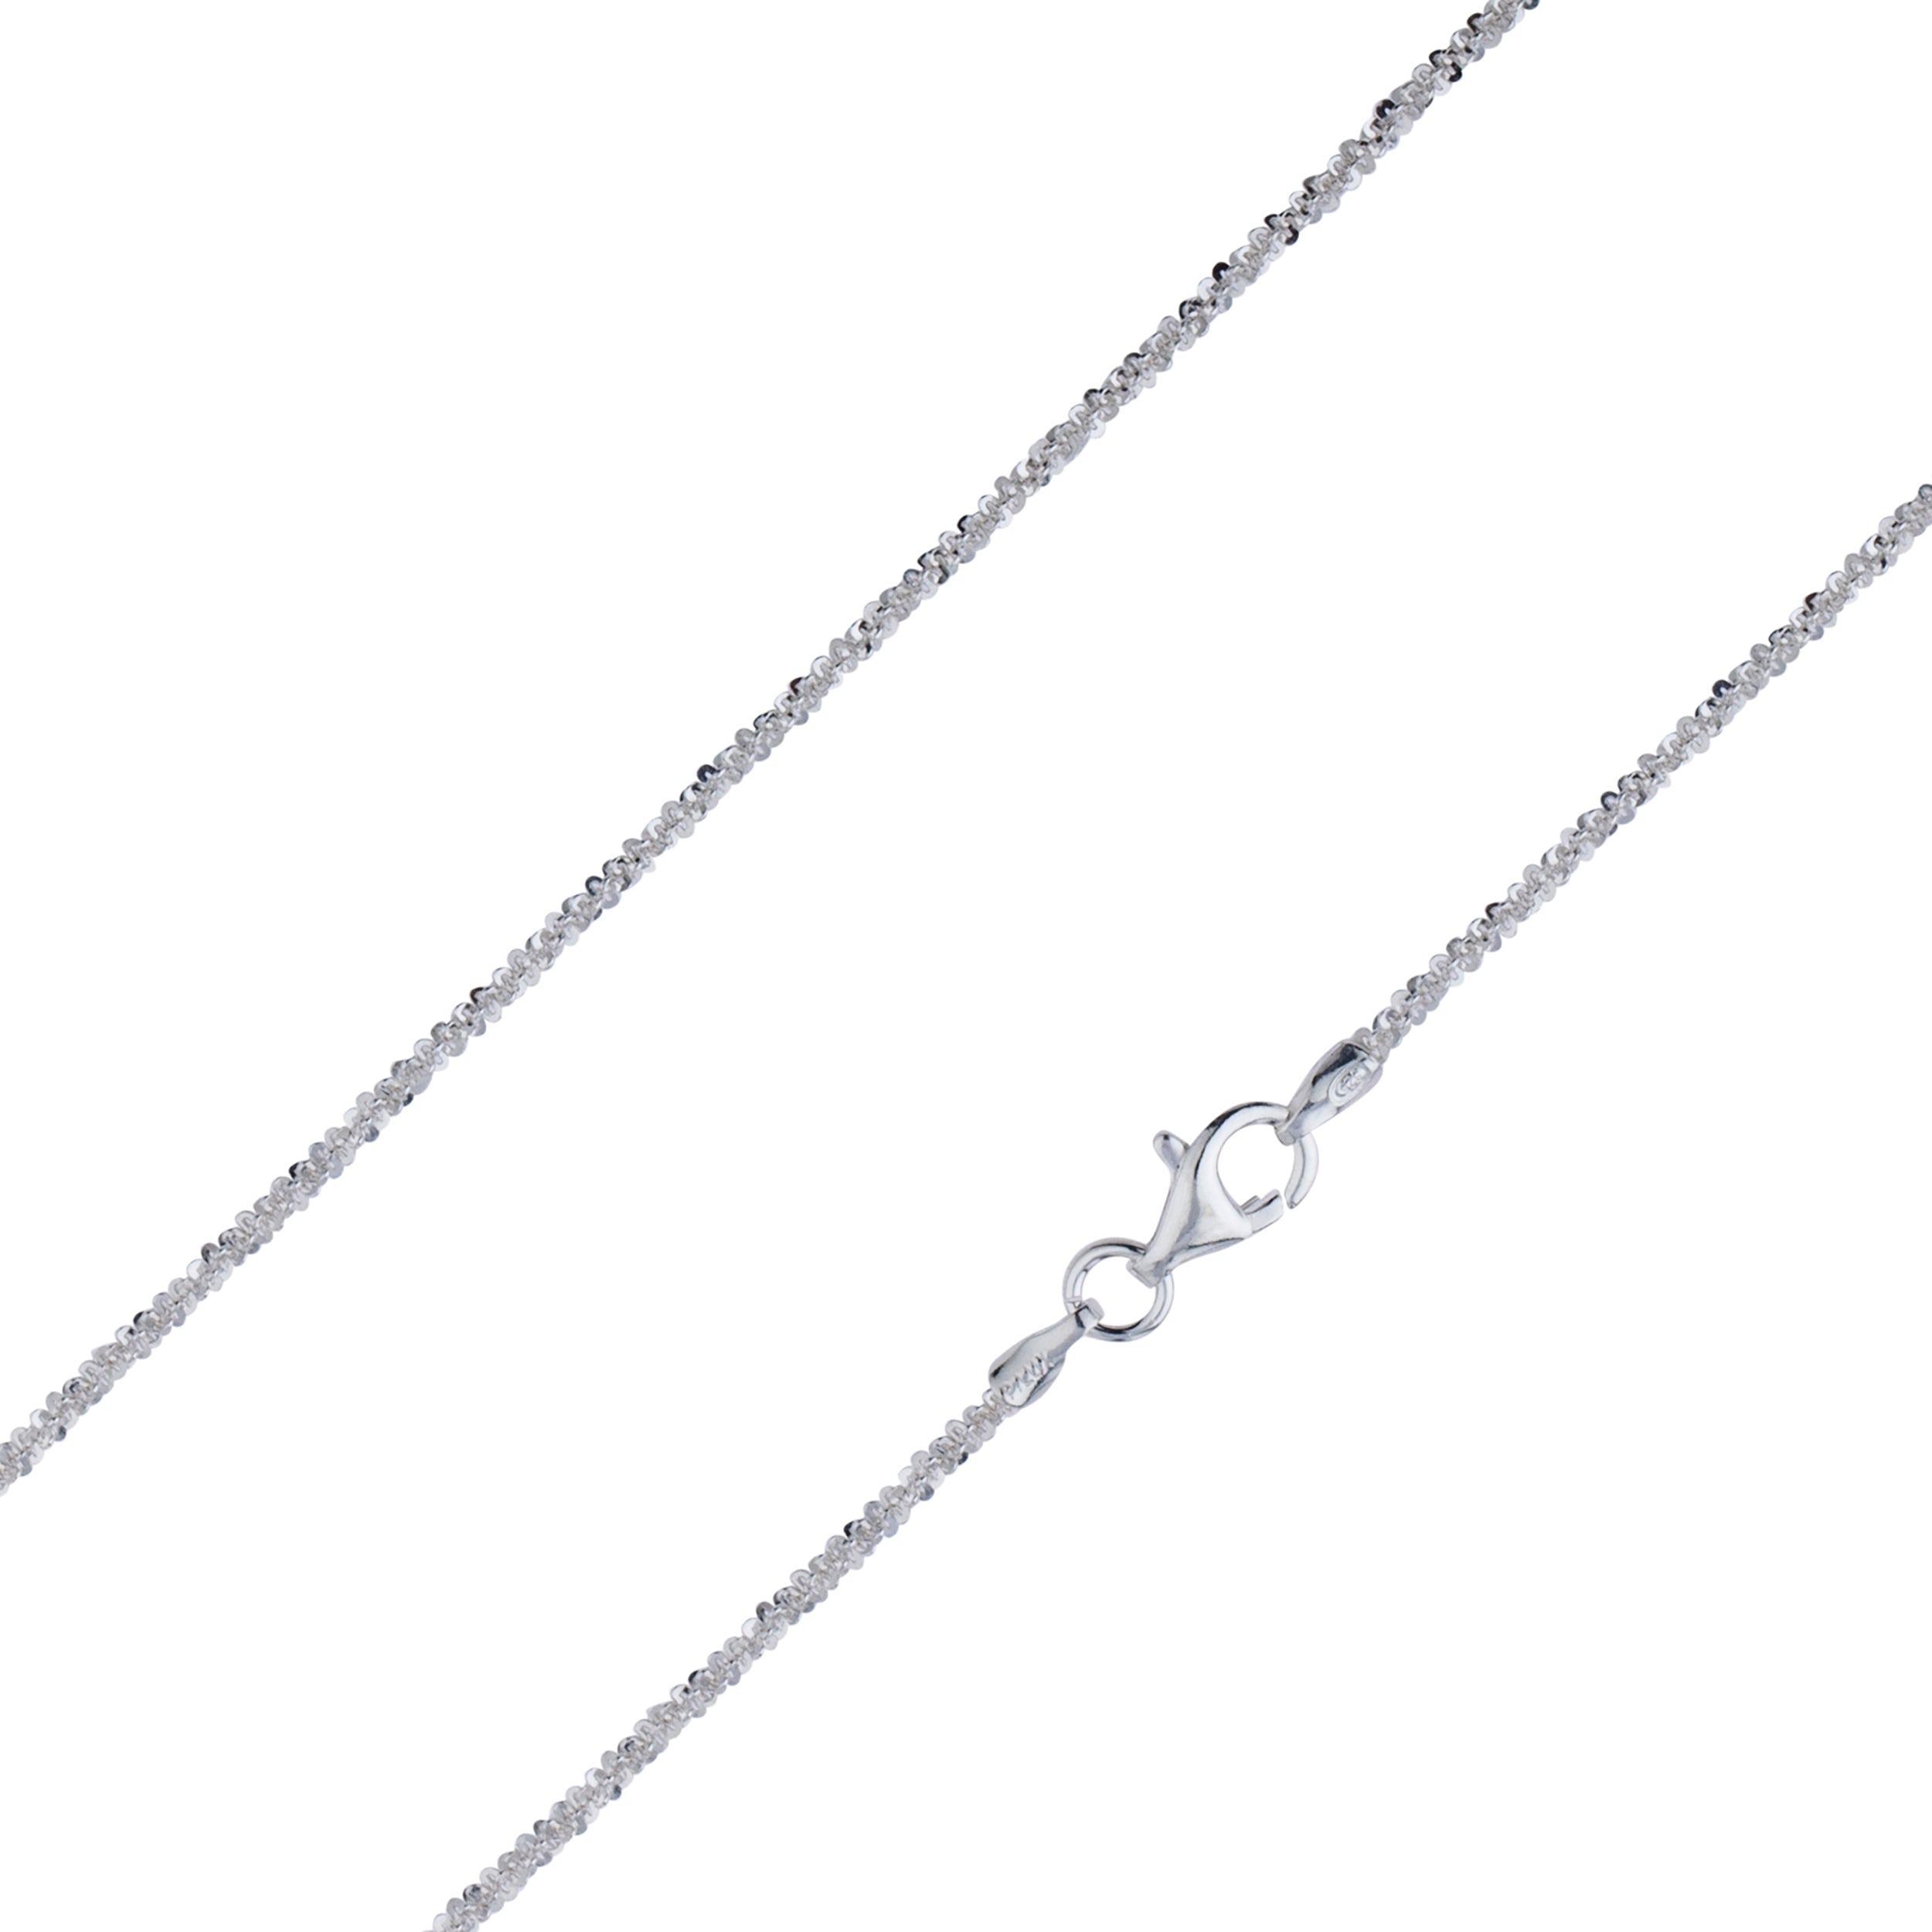 925 Sterling Silver 2mm Twisted Margarita Rock Chain